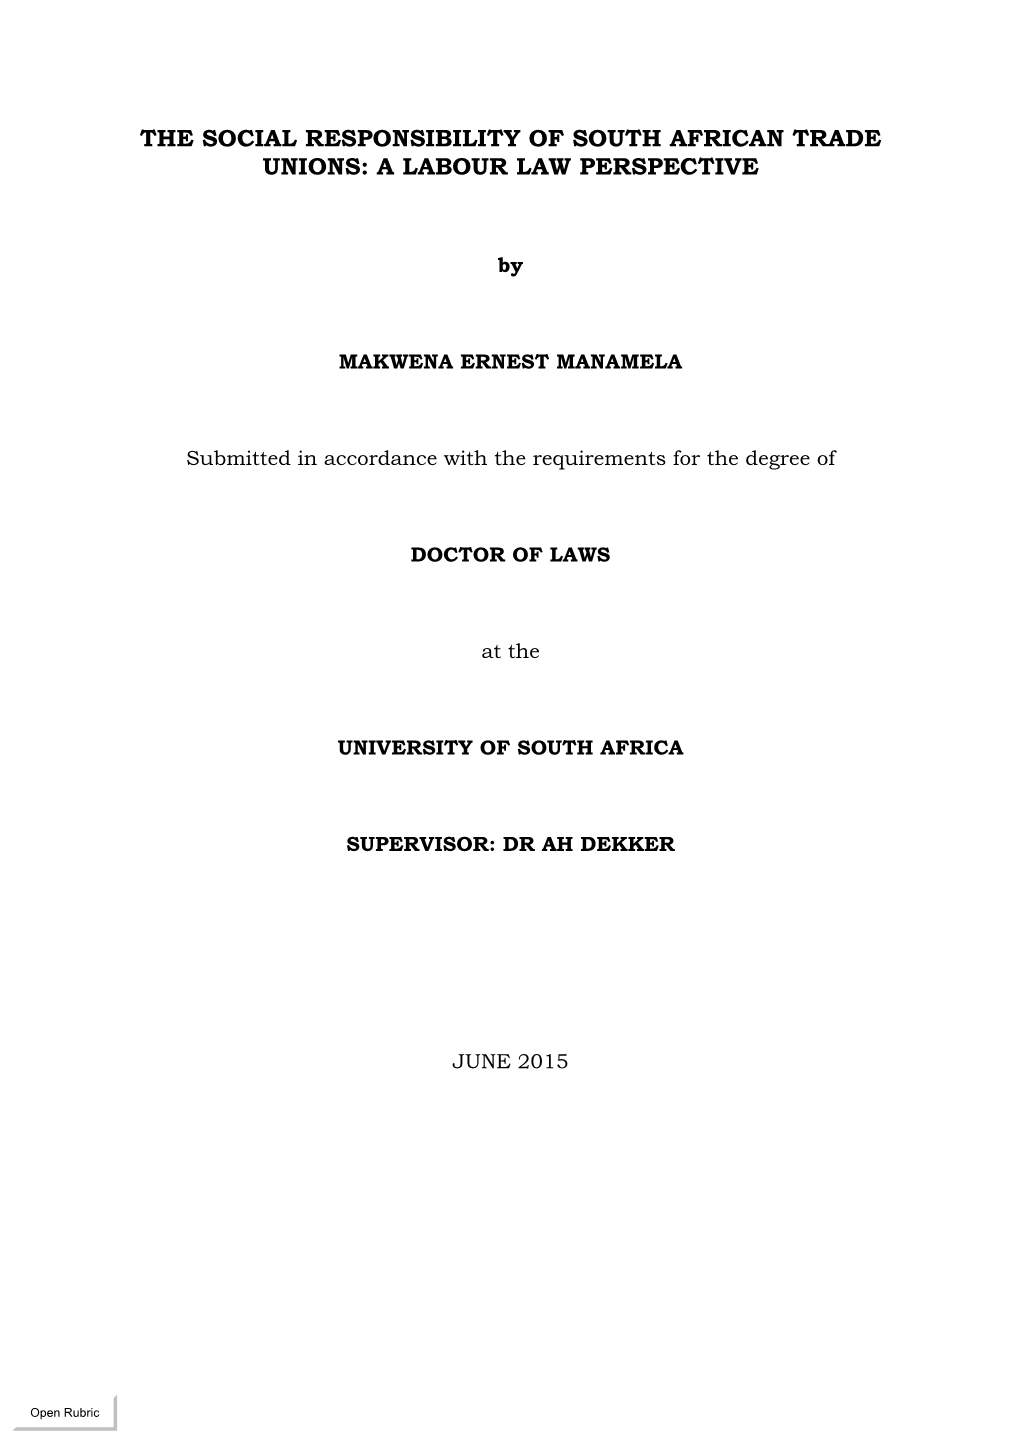 The Social Responsibility of South African Trade Unions: a Labour Law Perspective